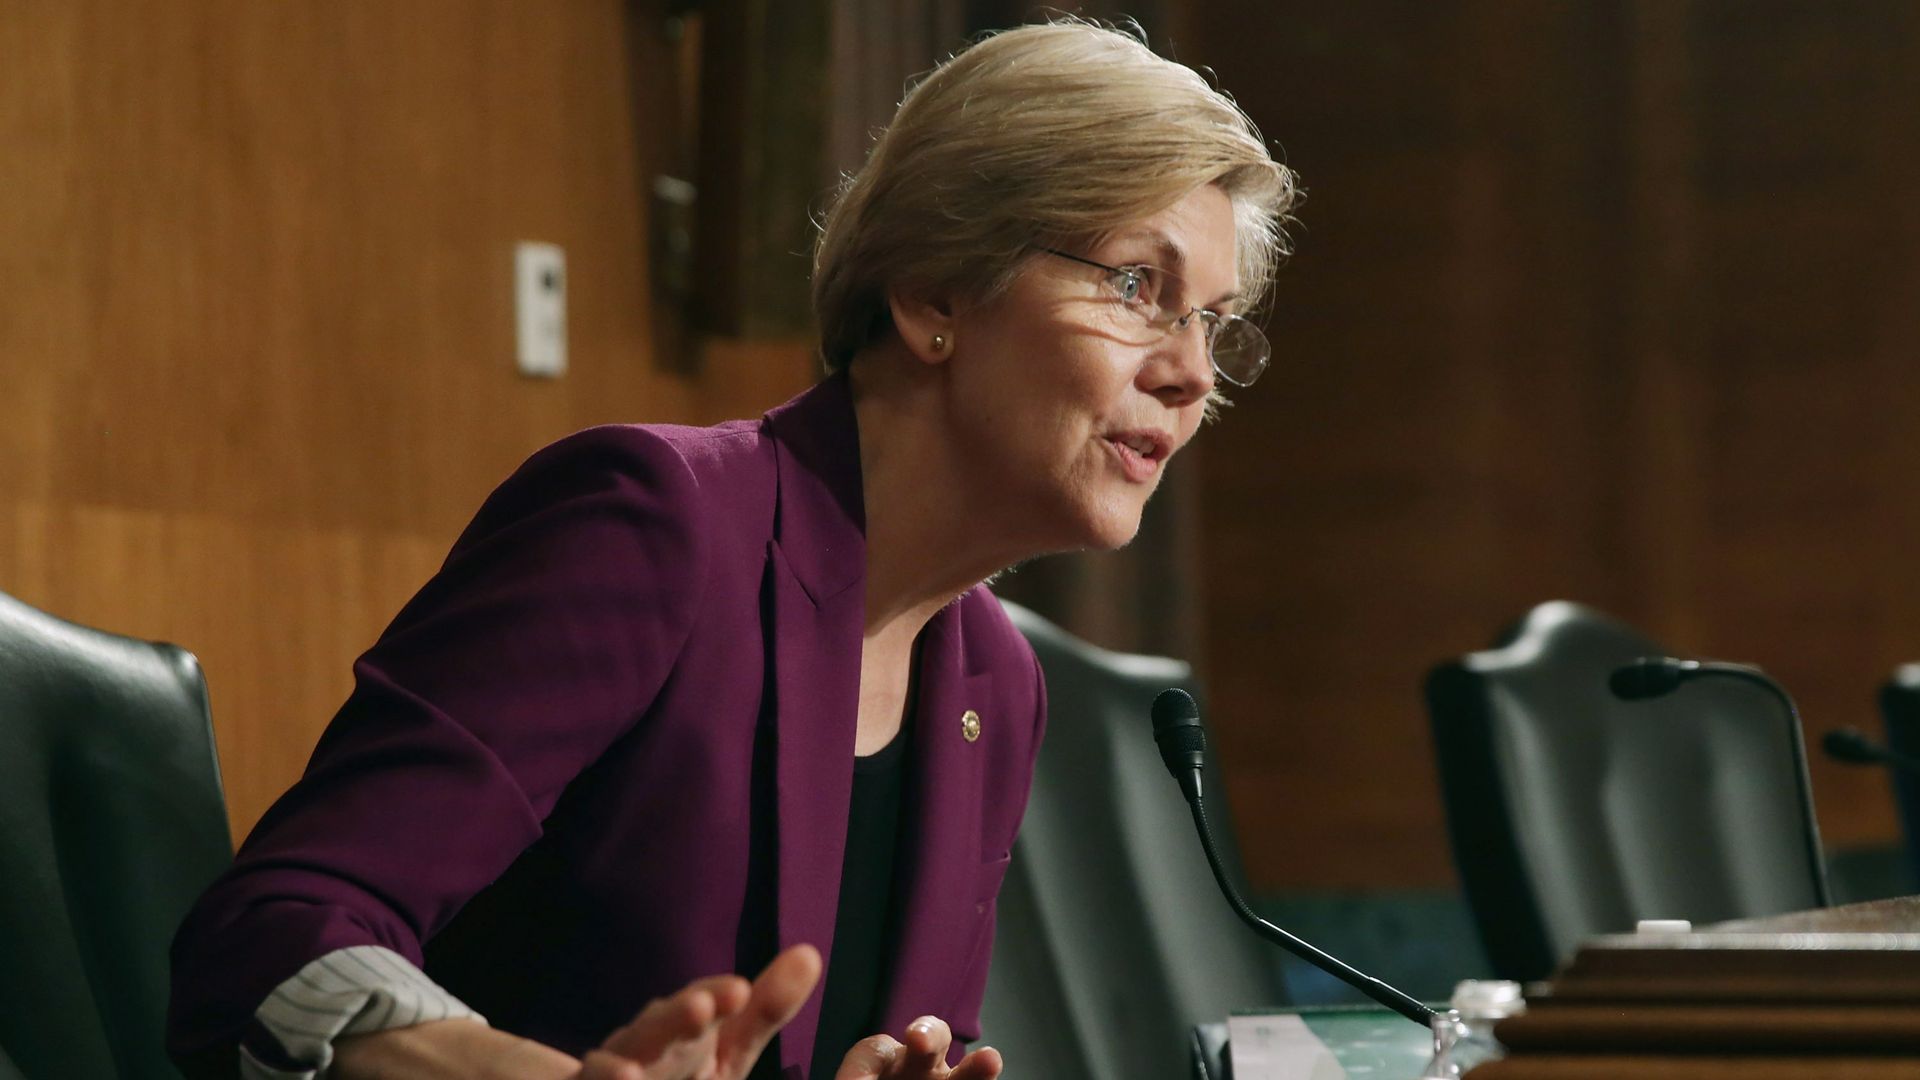 In this image, Elizabeth Warren speaks into a microphone at a committee hearing. 